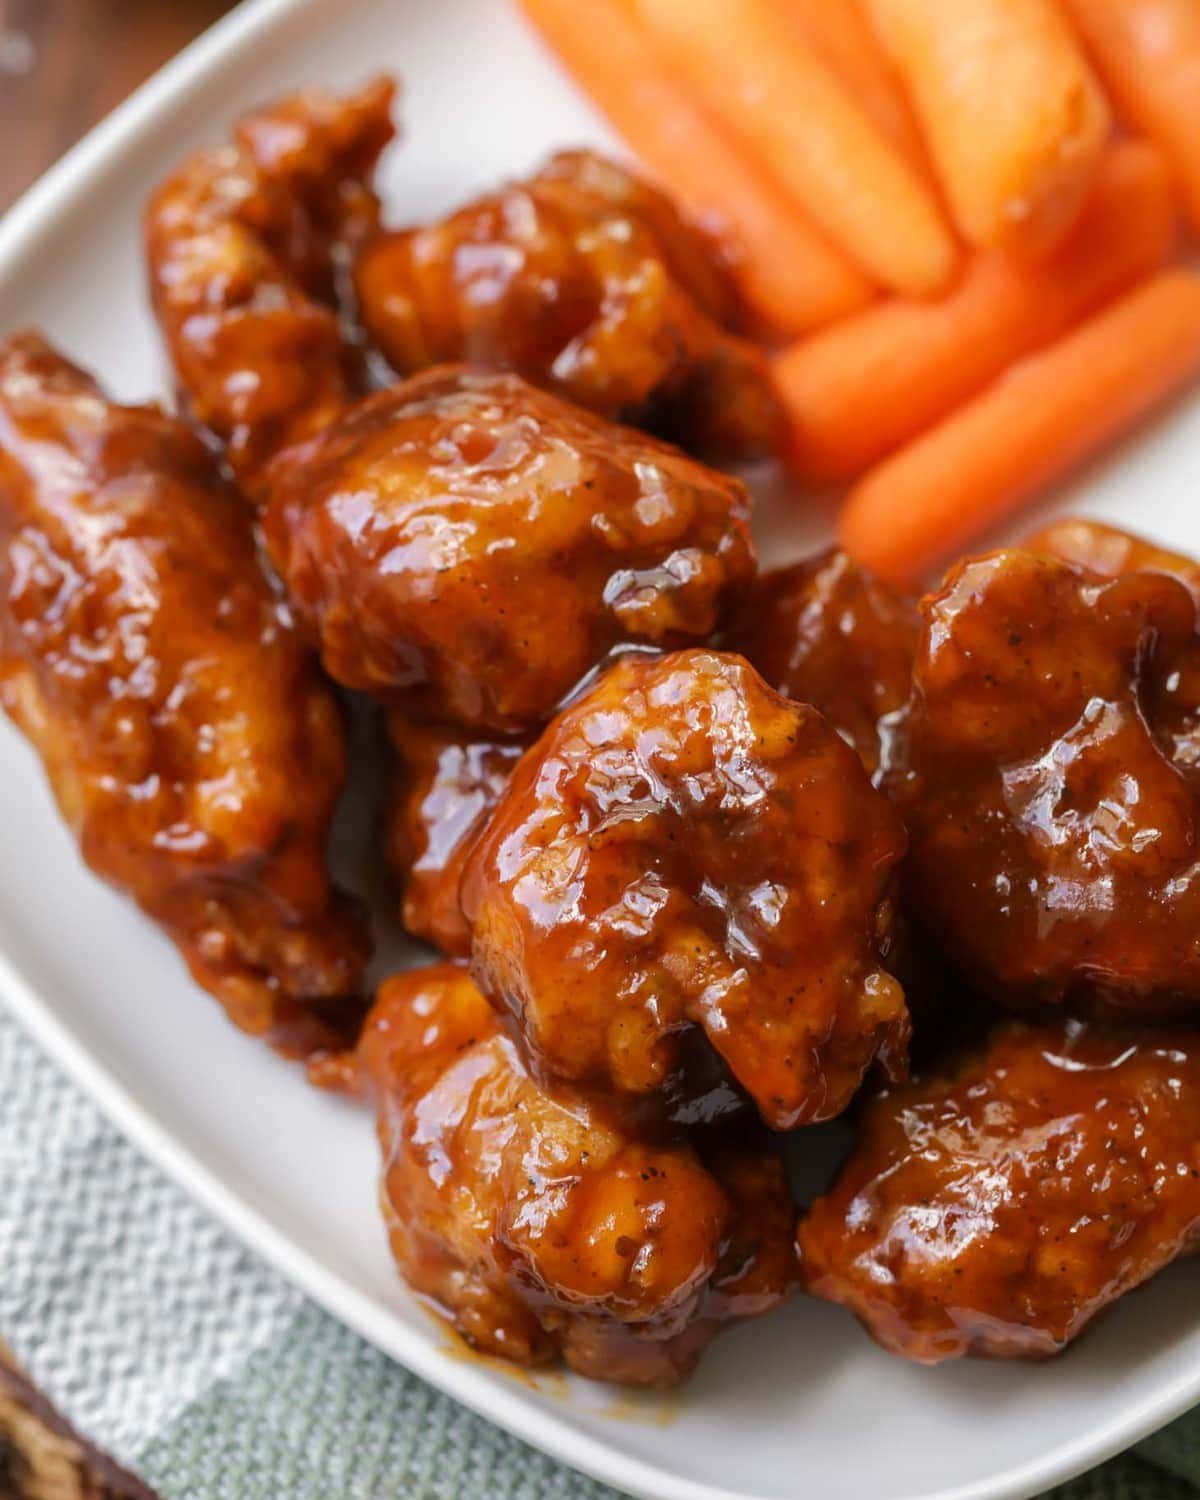 Honey bbq Boneless Wings served on a plate with carrots.